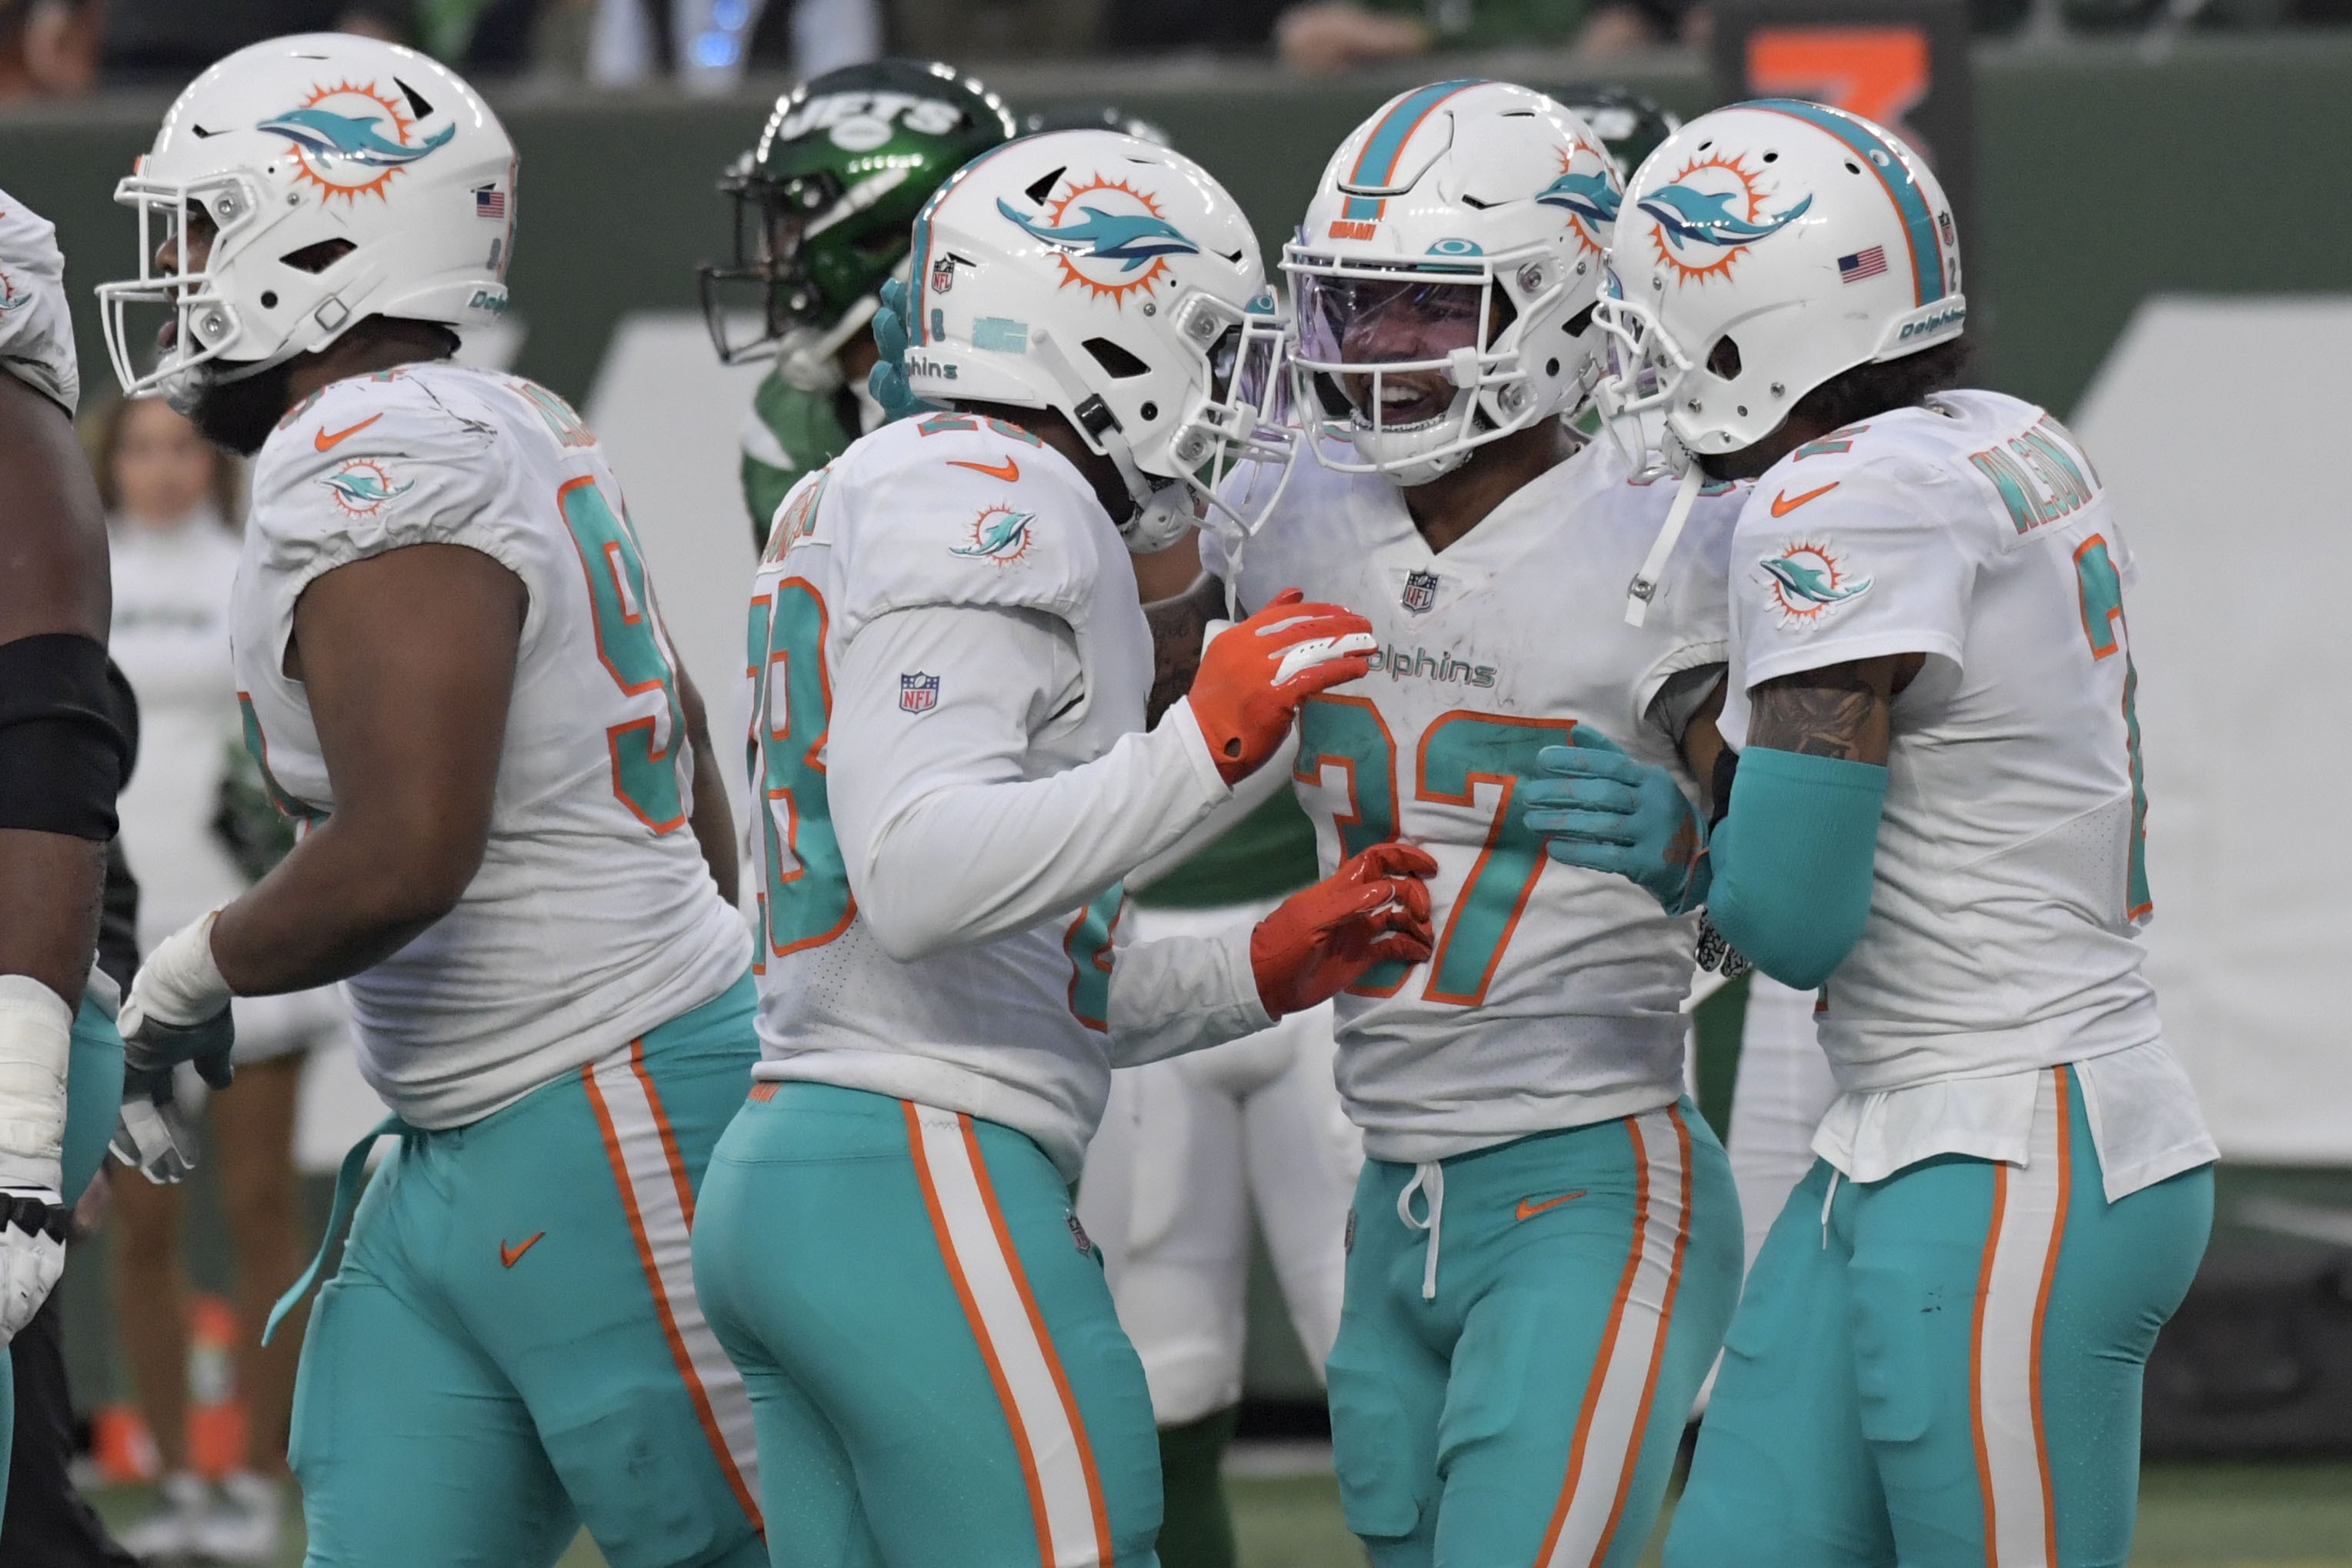 Dolphins win third straight, top Jets 2417 WTOP News